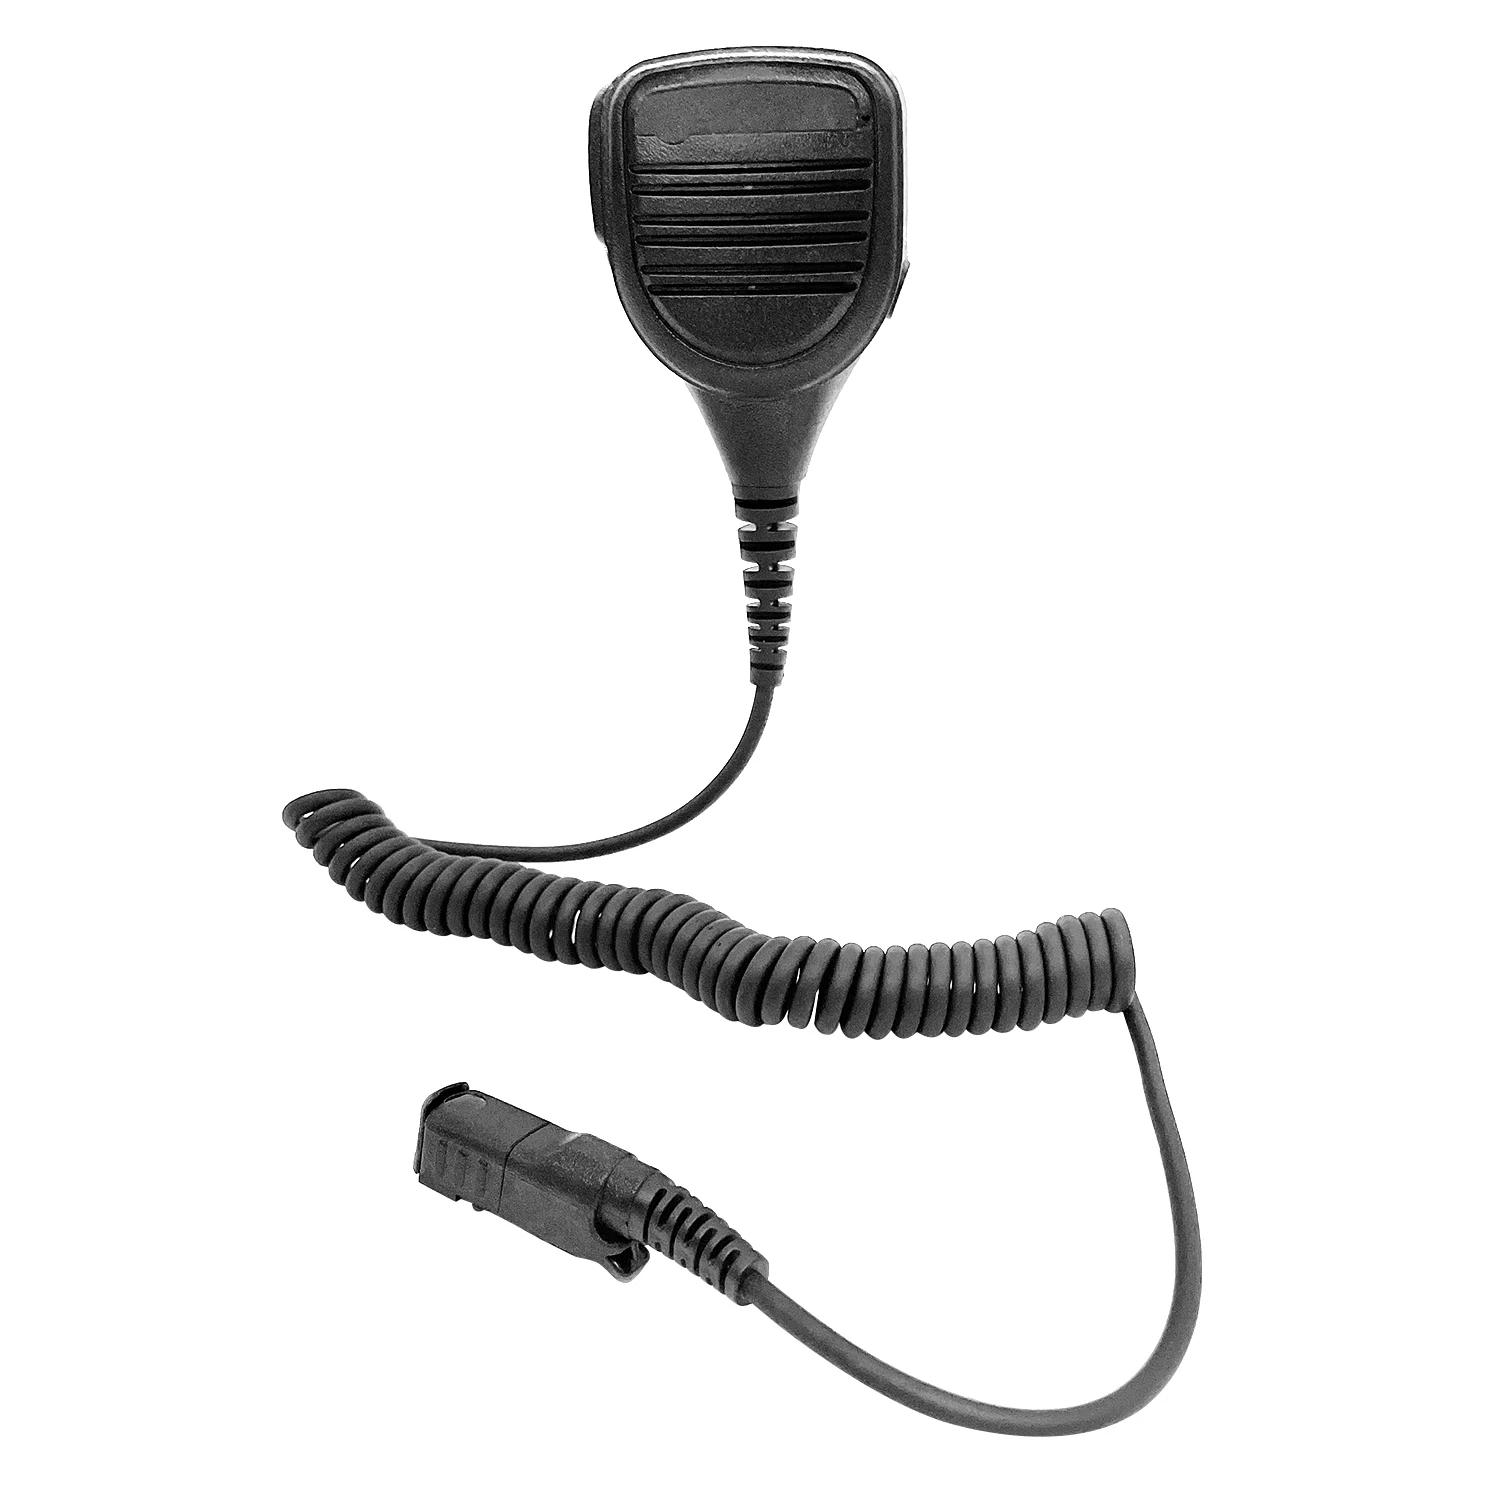 Remote Waterproof Speaker Mic Microphone for Two Way Radio  with Motorola XPR 3000, XPR 3300, XPR 3500, XPR 3000e, XPR 3500e